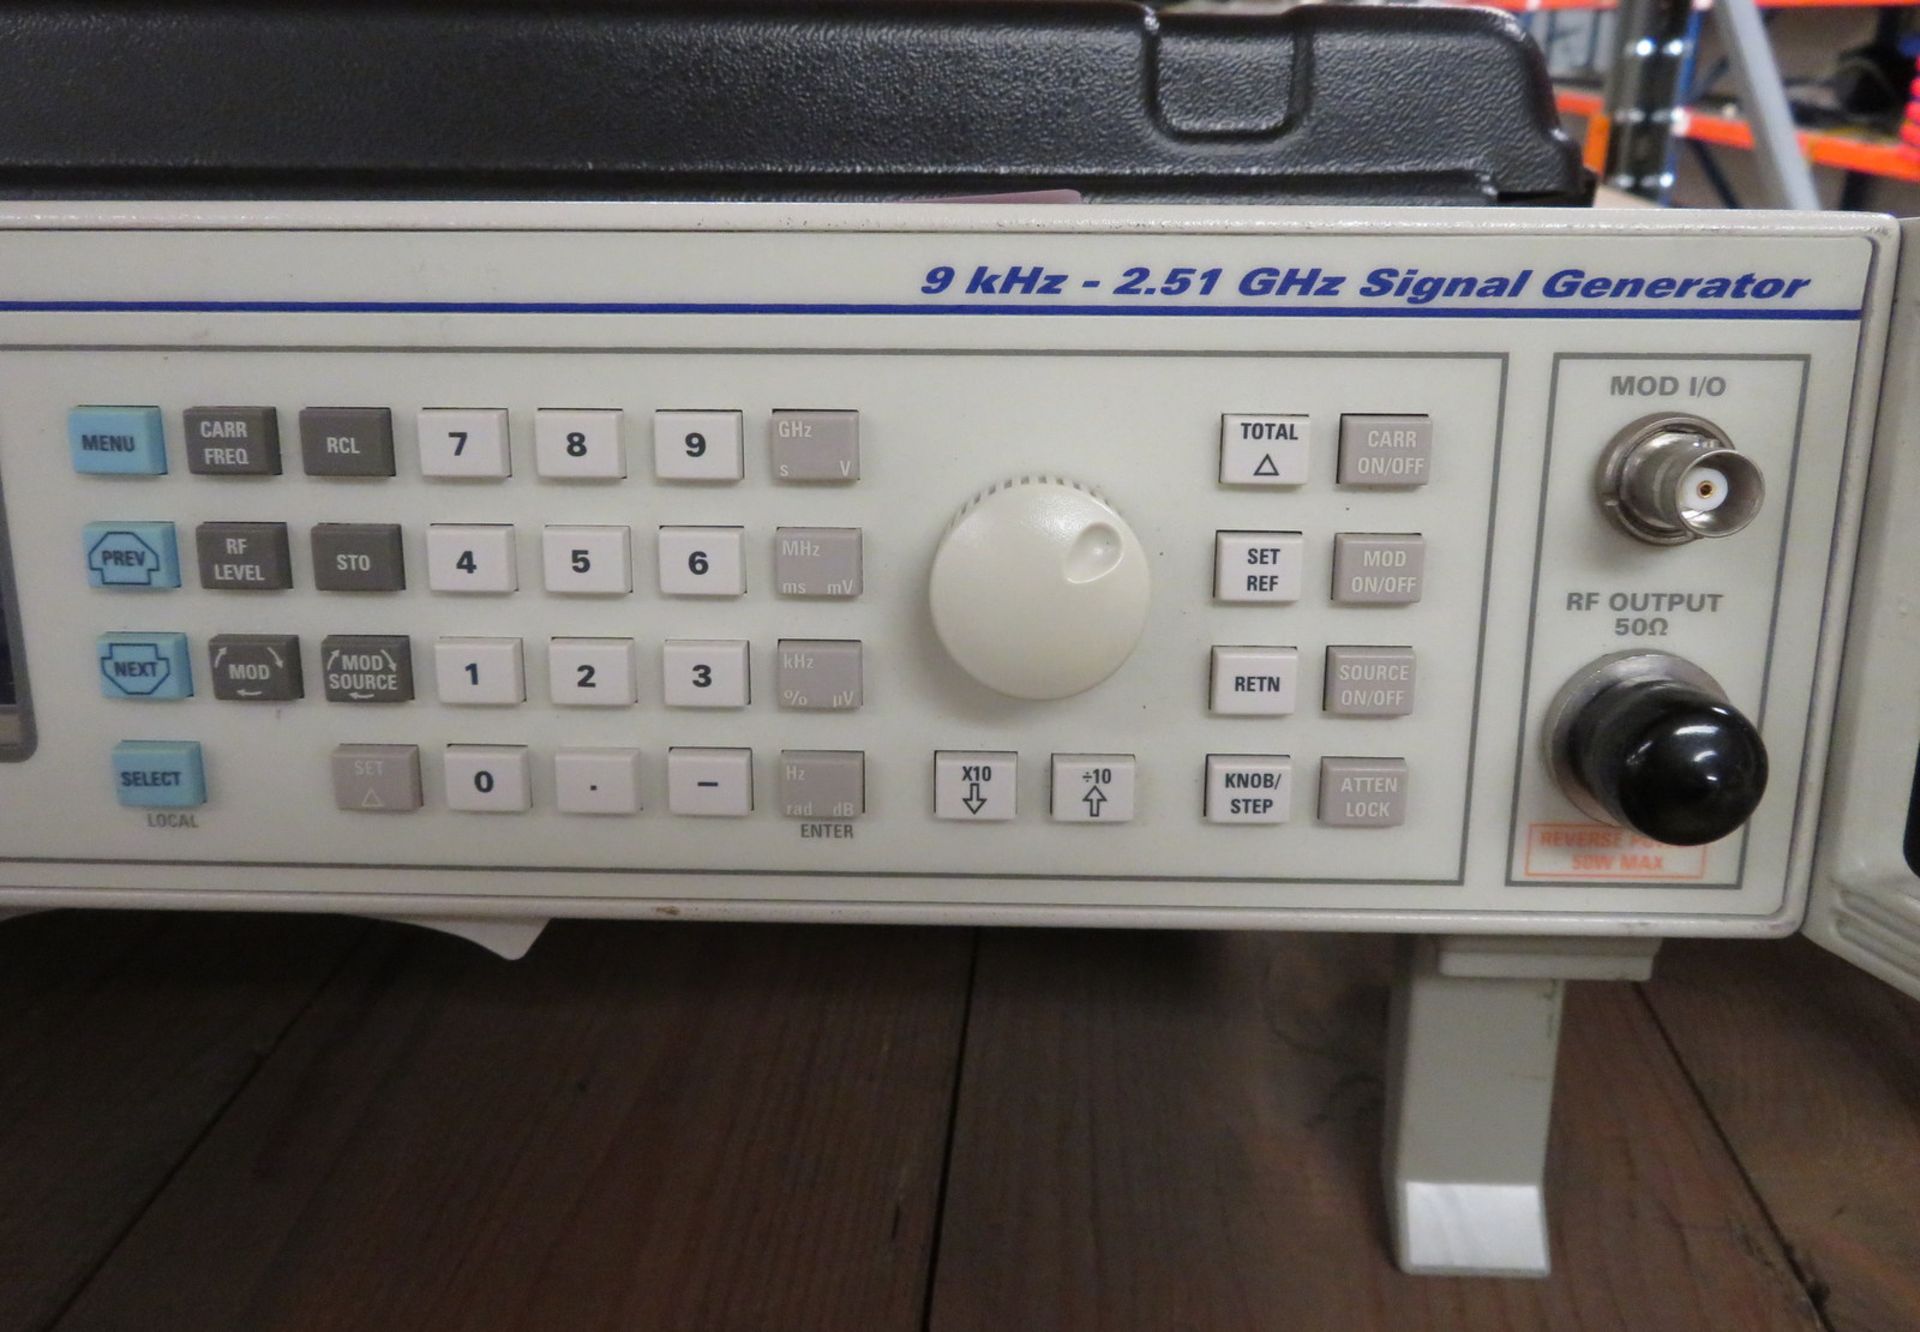 IFR 2025 signal generator 9kHz - 2.51GHz - Image 3 of 4